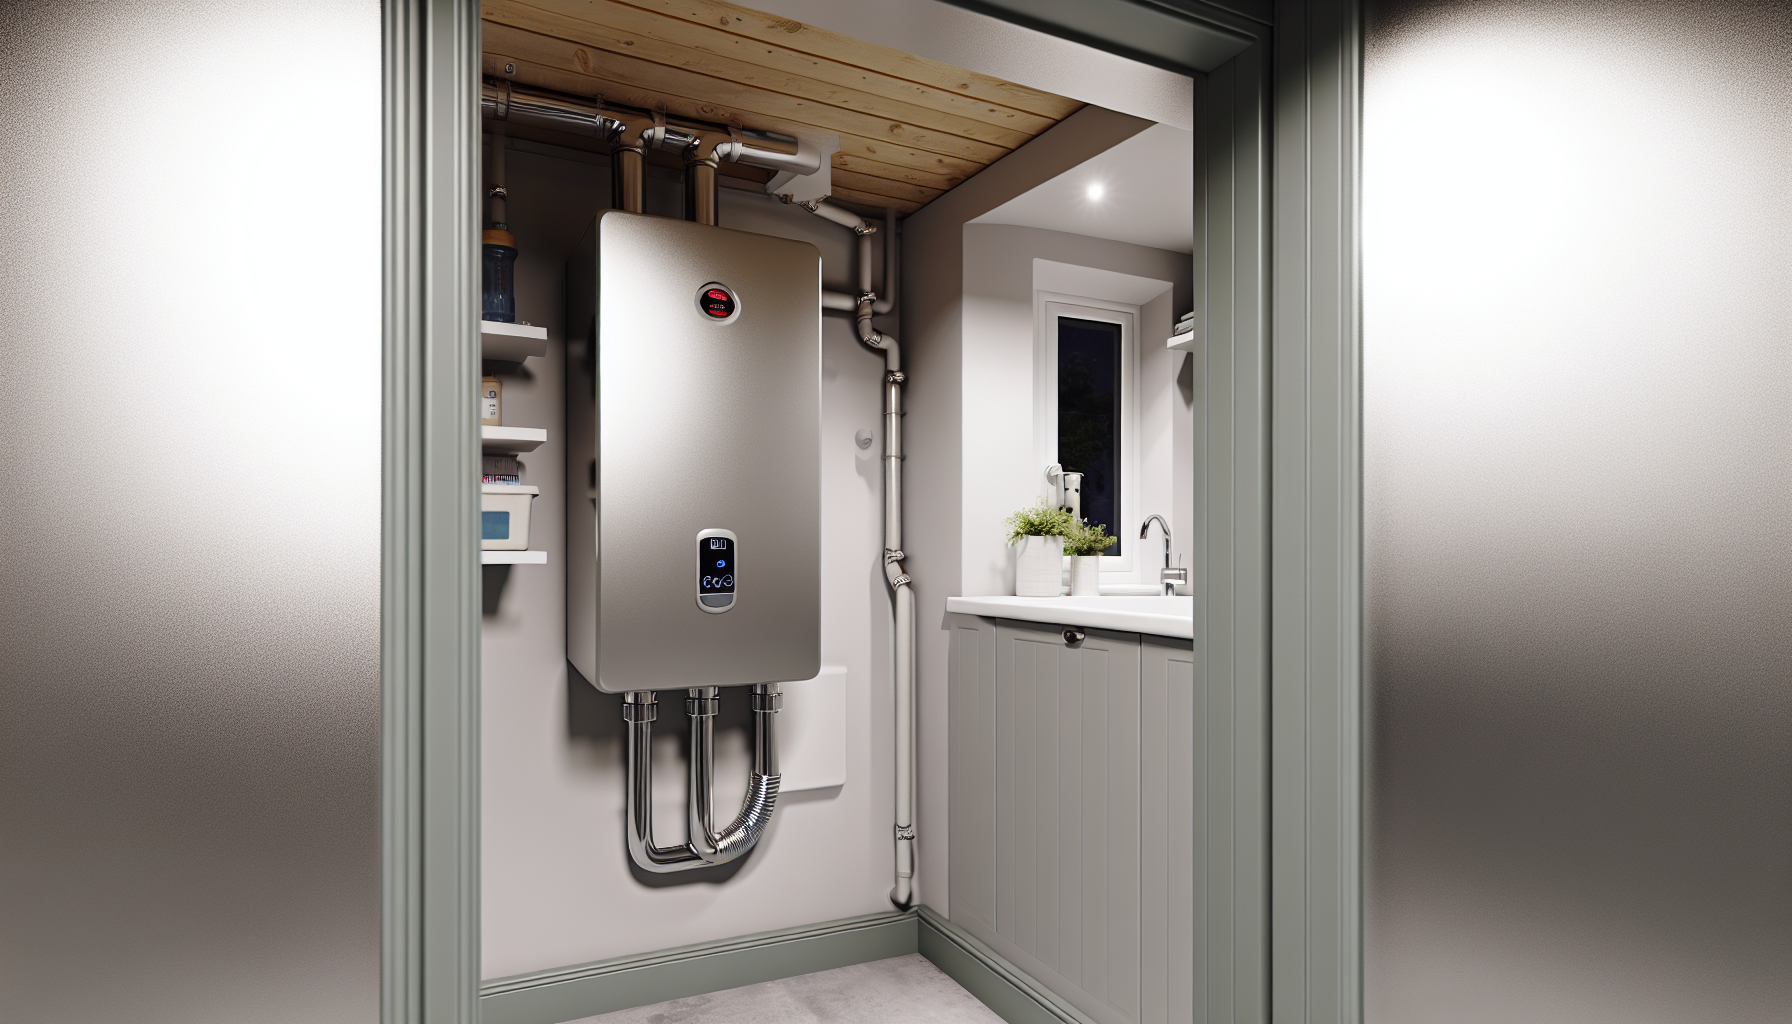 Energy efficient hot water system installation